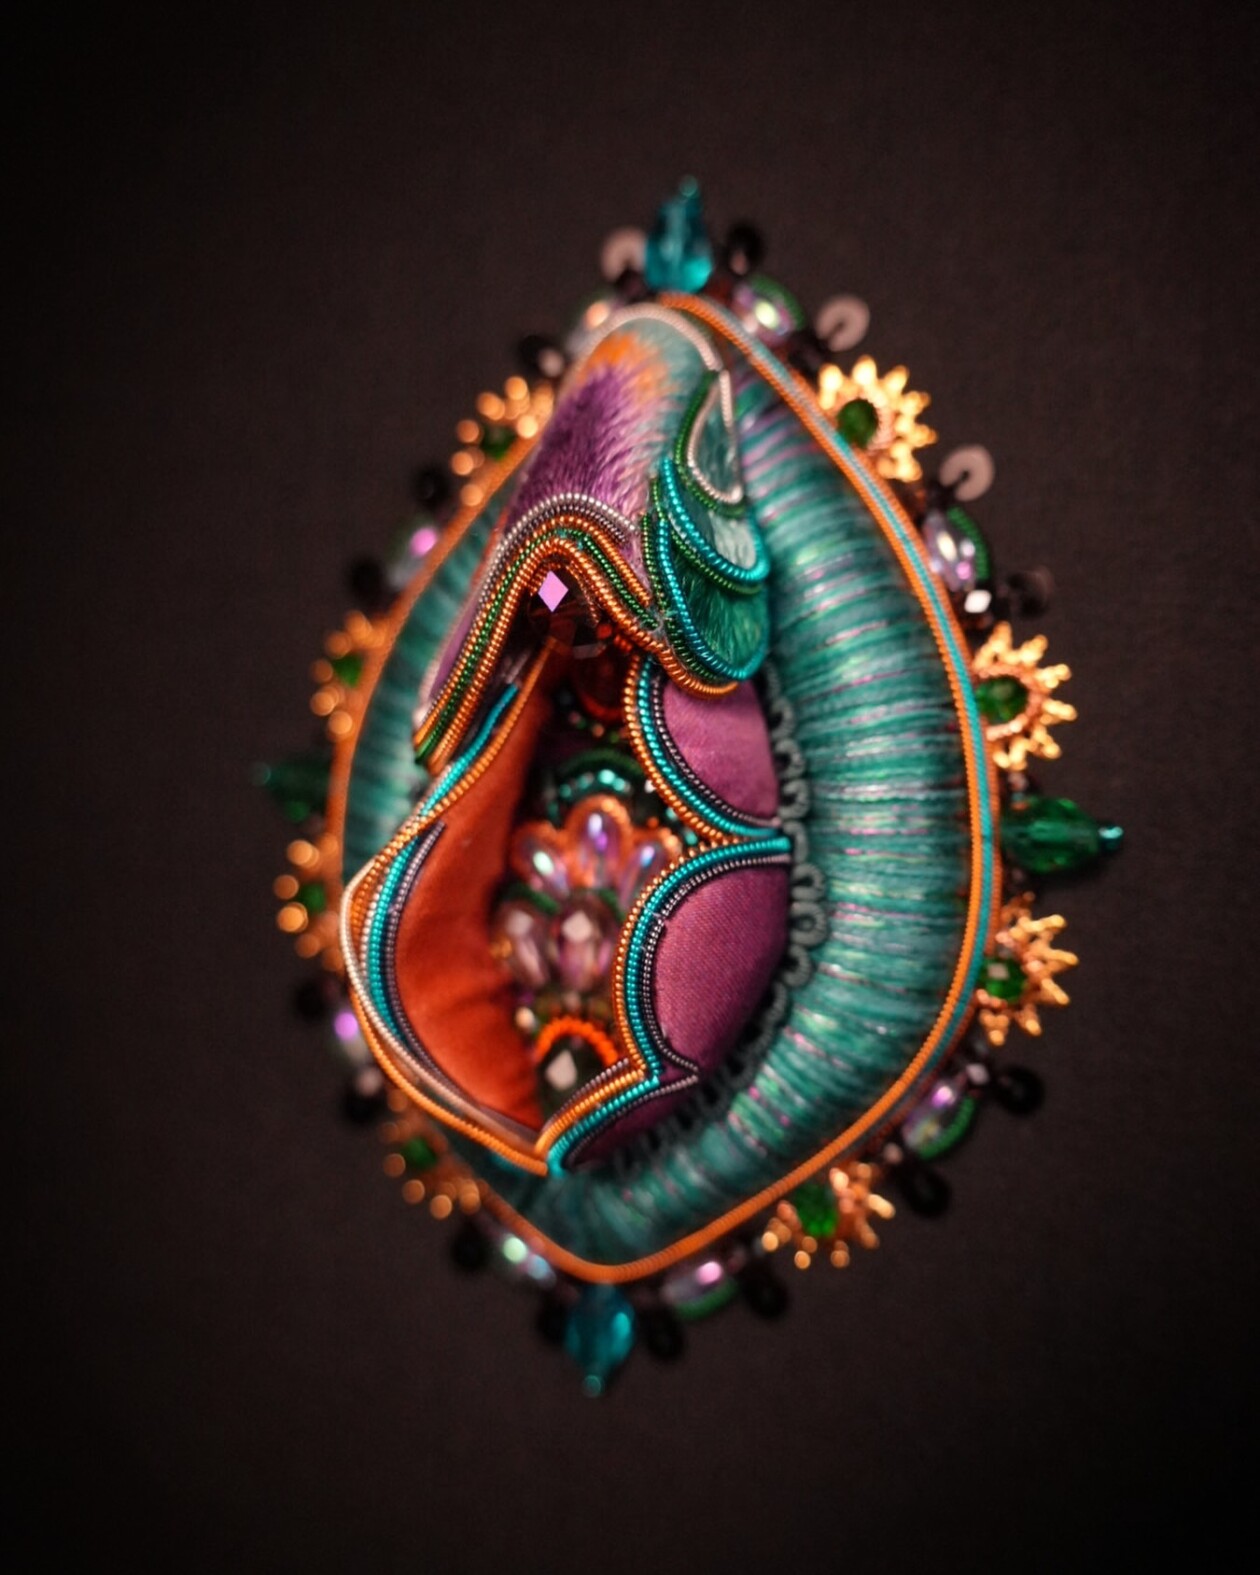 The Exquisite Embroidery And Bead Sculptures Of Studio Over And Out (11)